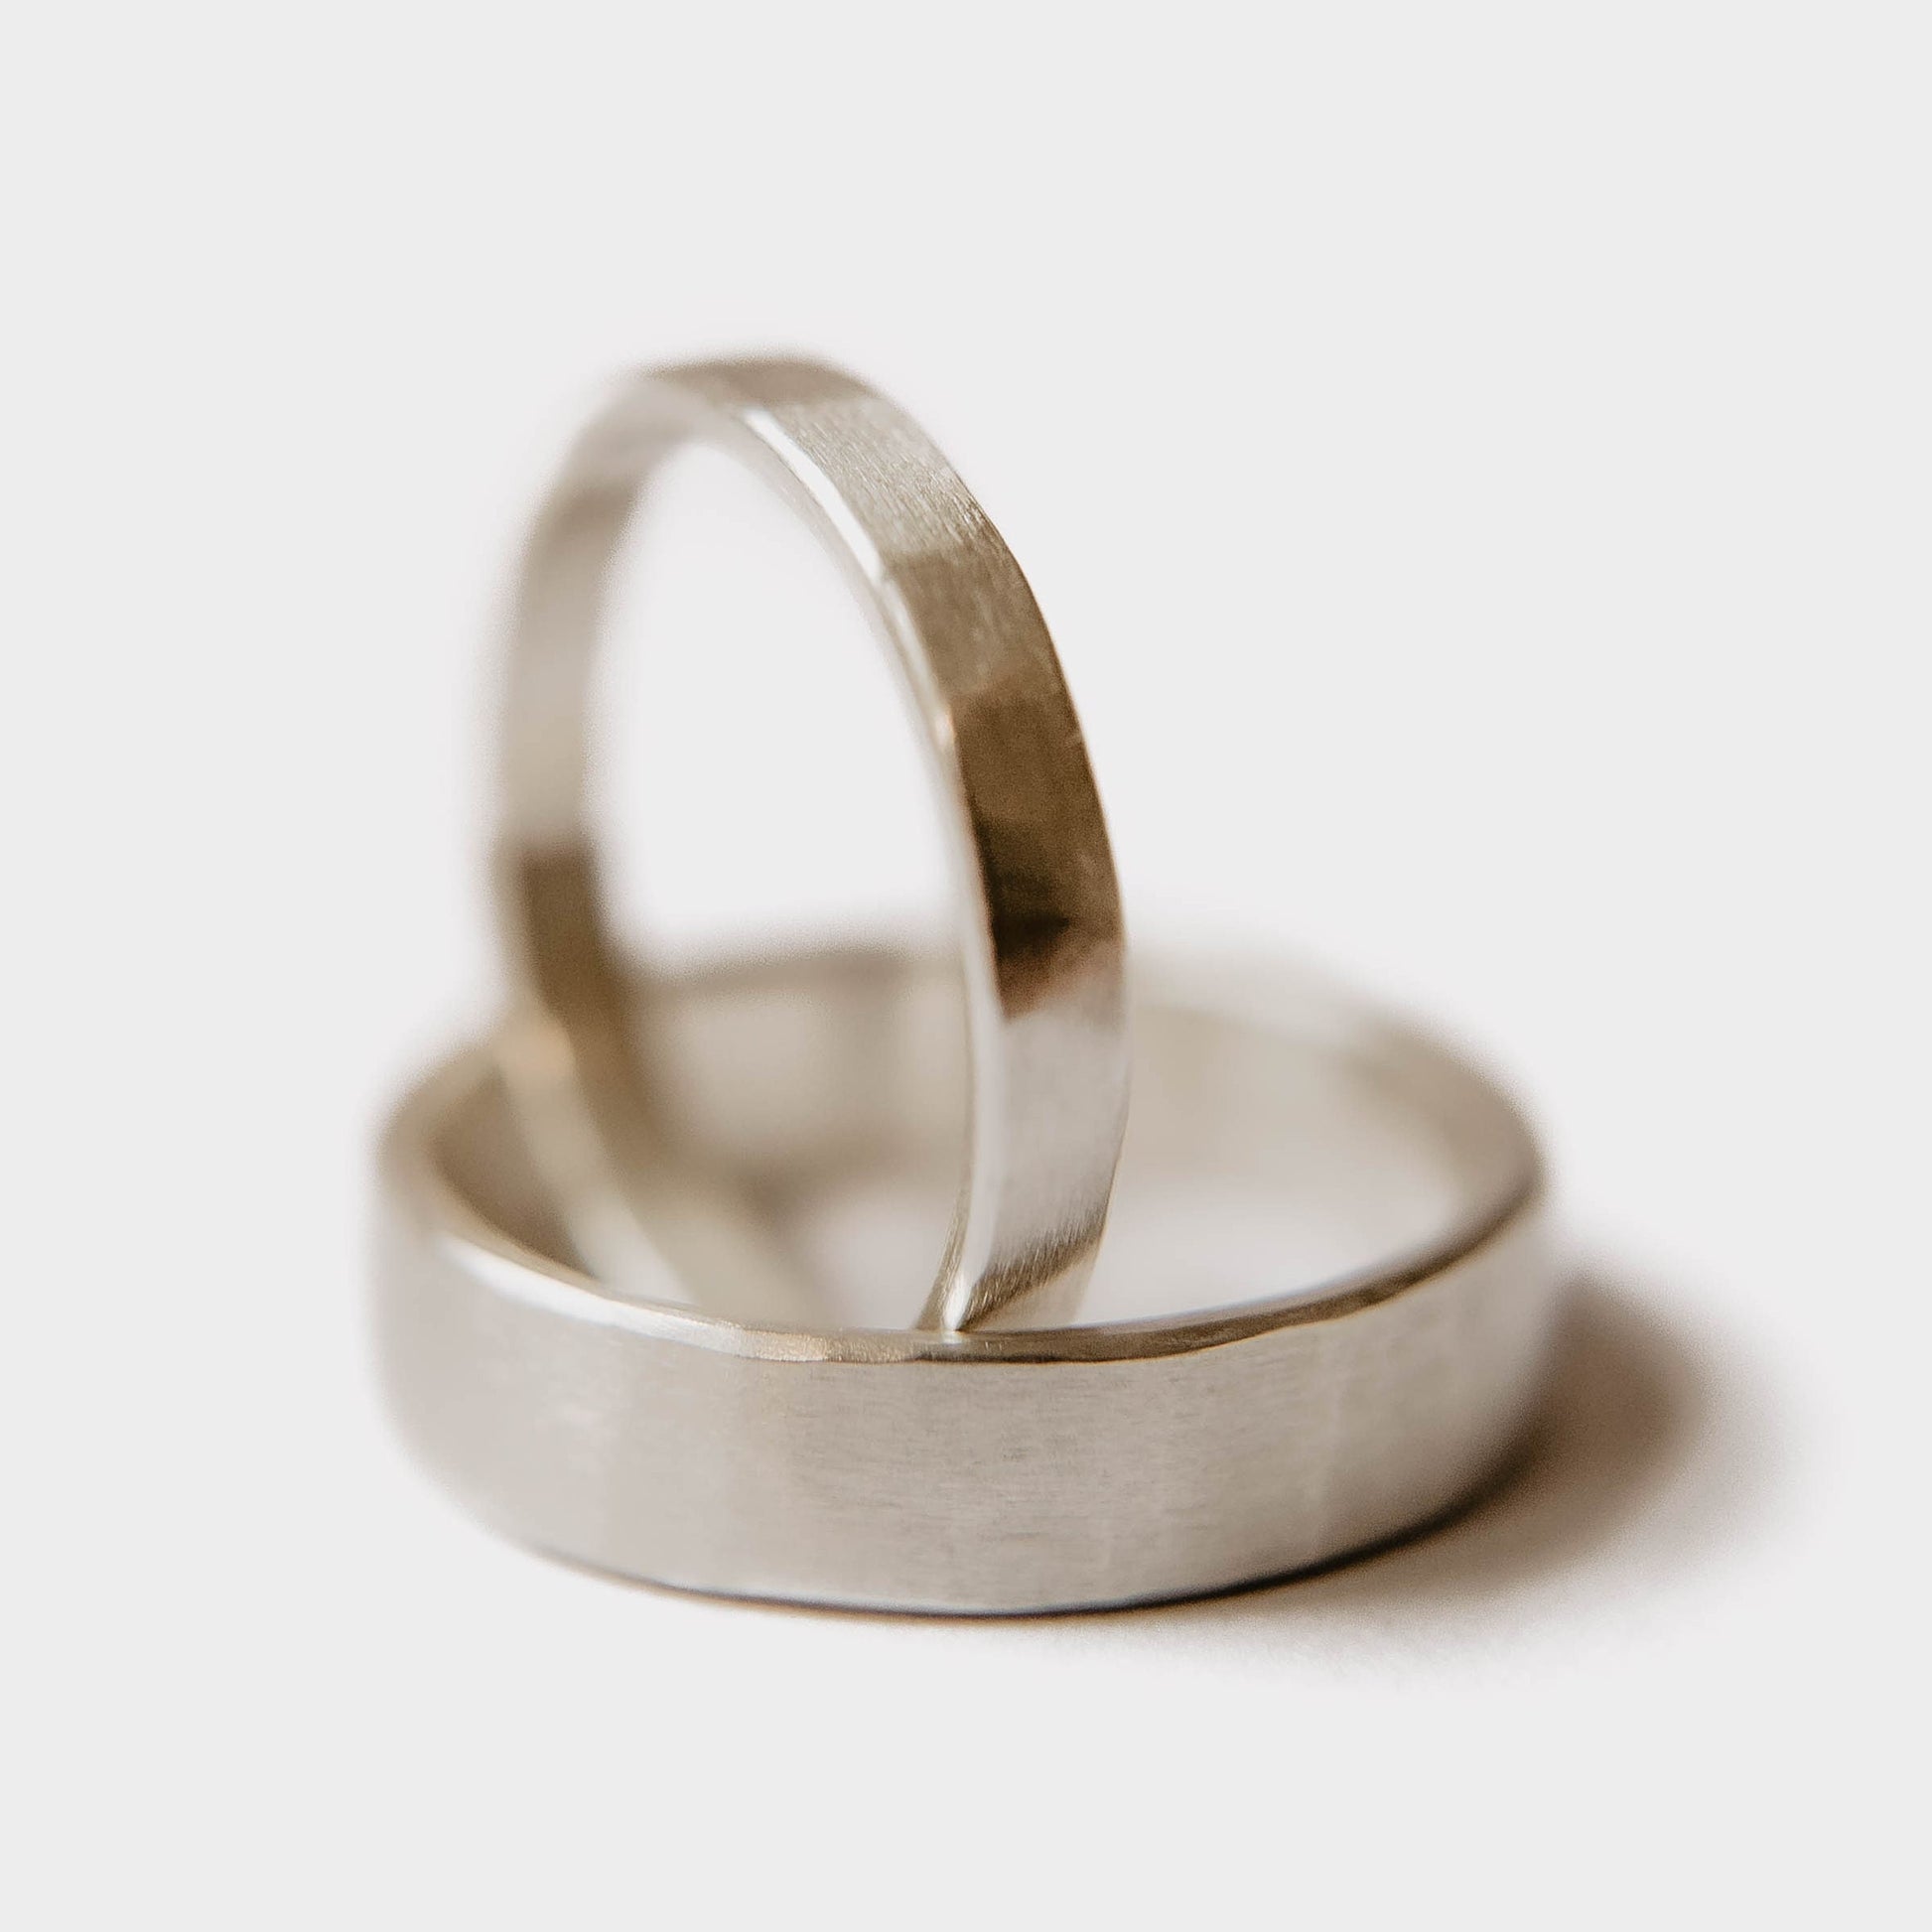 Womens sterling silver wedding band. This photo shows a lightly faceted silver ring. (vertical inside mens silver ring with white background)